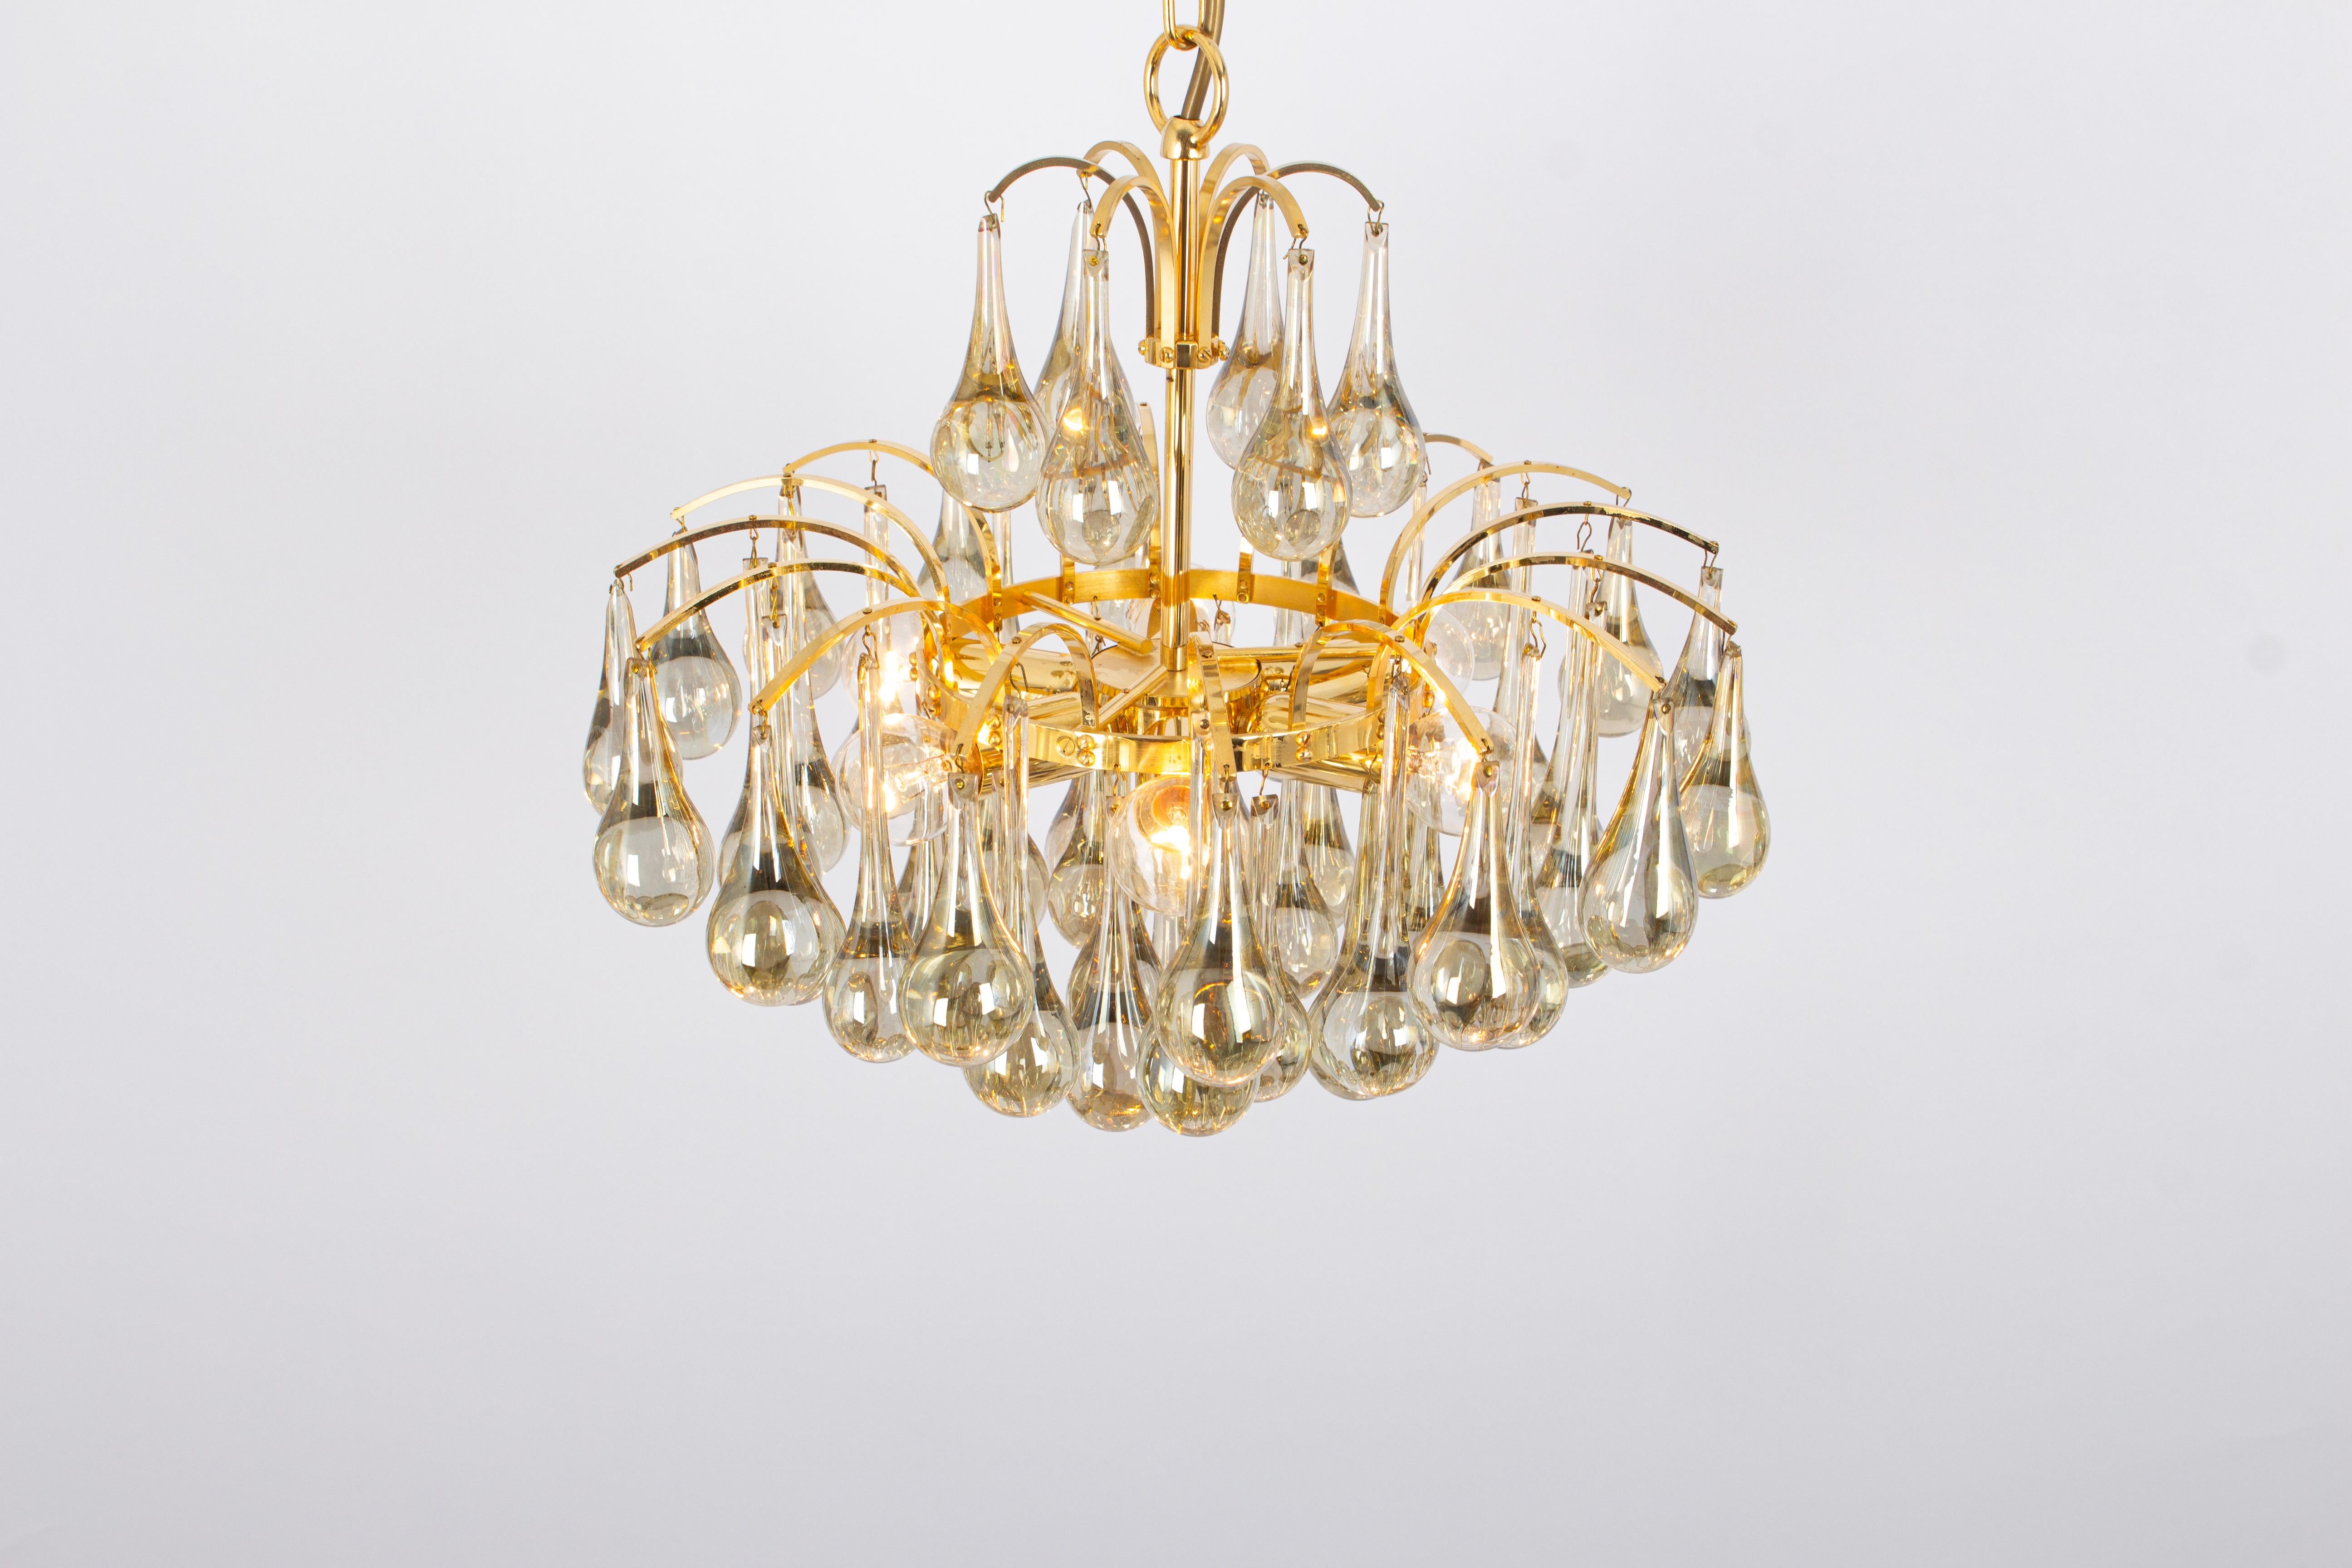 Mid-Century Modern Large Murano Glass Tear Drop Chandelier, Christoph Palme, Germany, 1970s For Sale